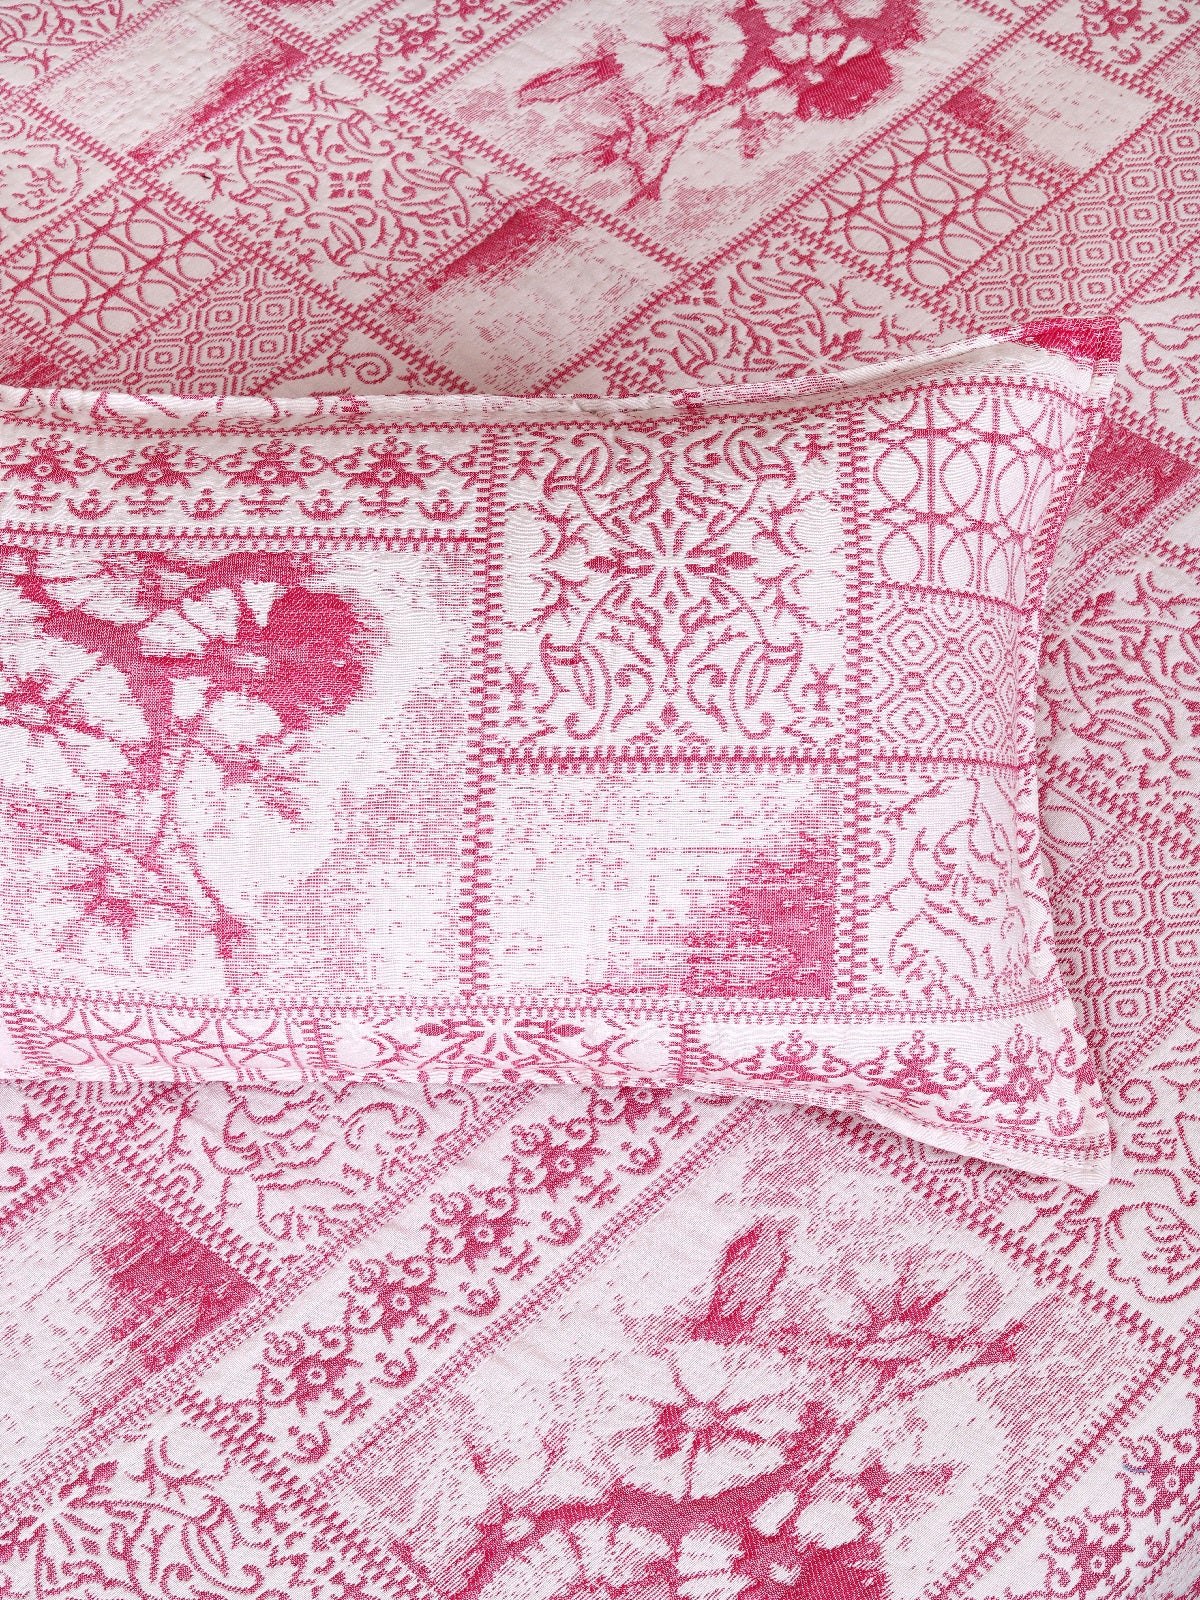 Pink & White Ethnic Motifs Patterned Reversible Double Bed Cover With 2 Pillow Covers